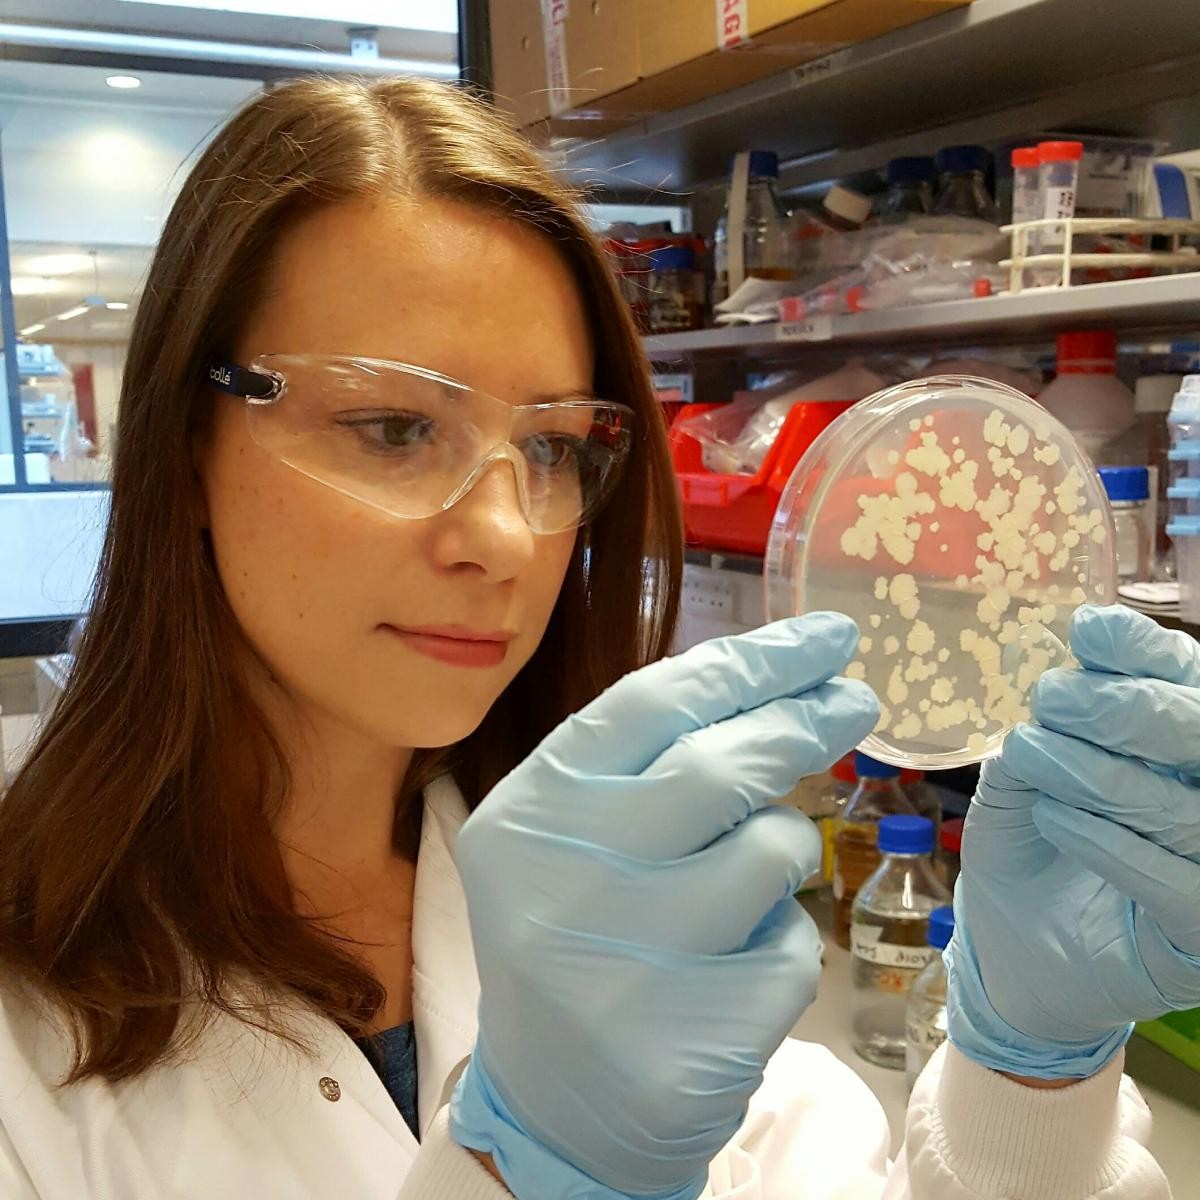 Dr Rachel Tanner studying a sample in a petri dish